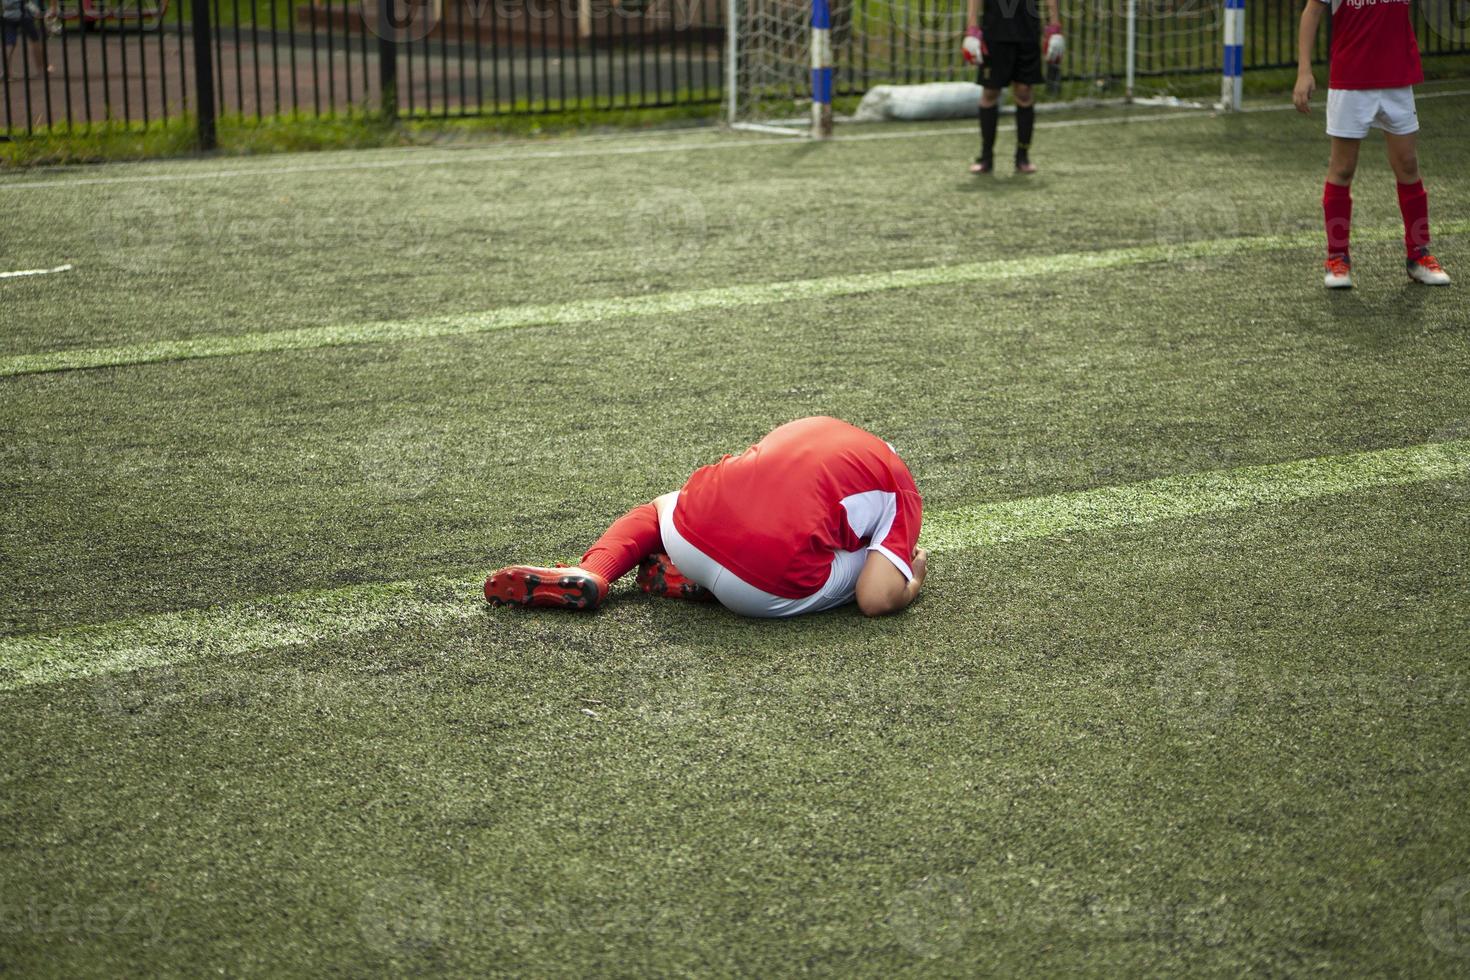 Footballer fell. Child plays football. Injury on field. Game details. photo